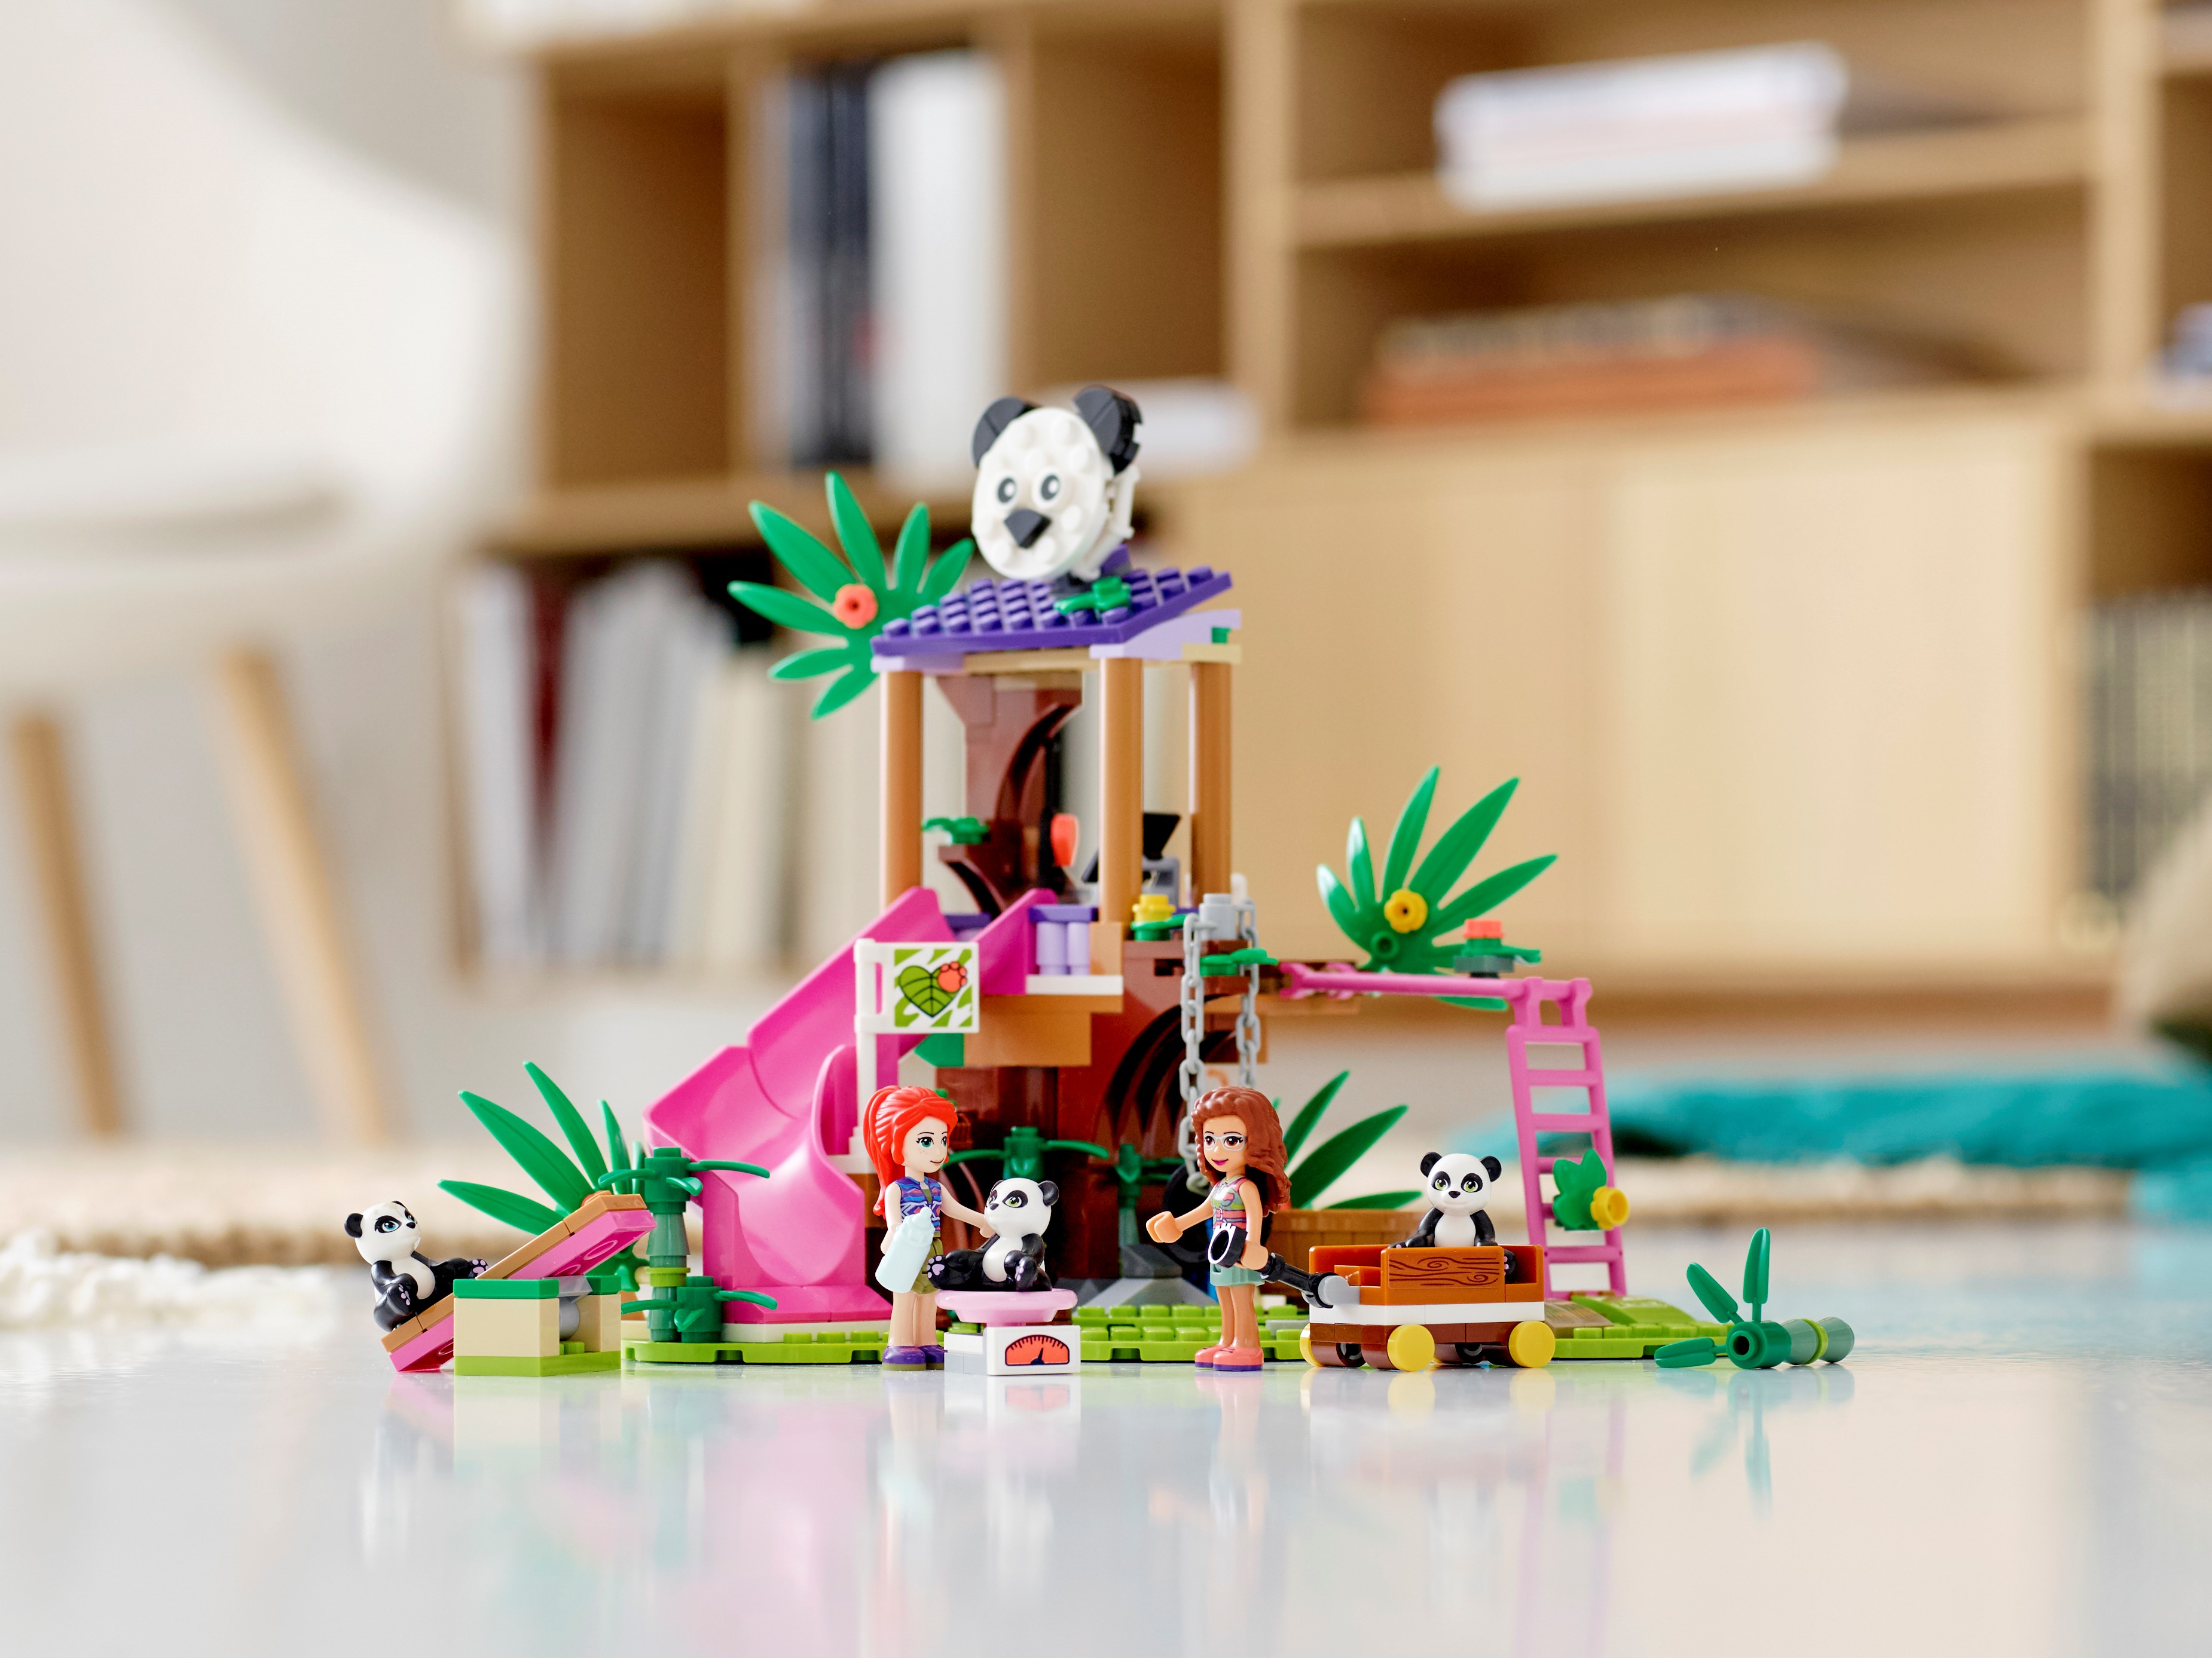 265 Pieces LEGO Friends Panda Jungle Tree House 41422 Building Toy; Includes 3 Panda LEGO Minifigures for KidsWho Love Wildlife Animals and LEGO Friends Mia and Olivia New 2020